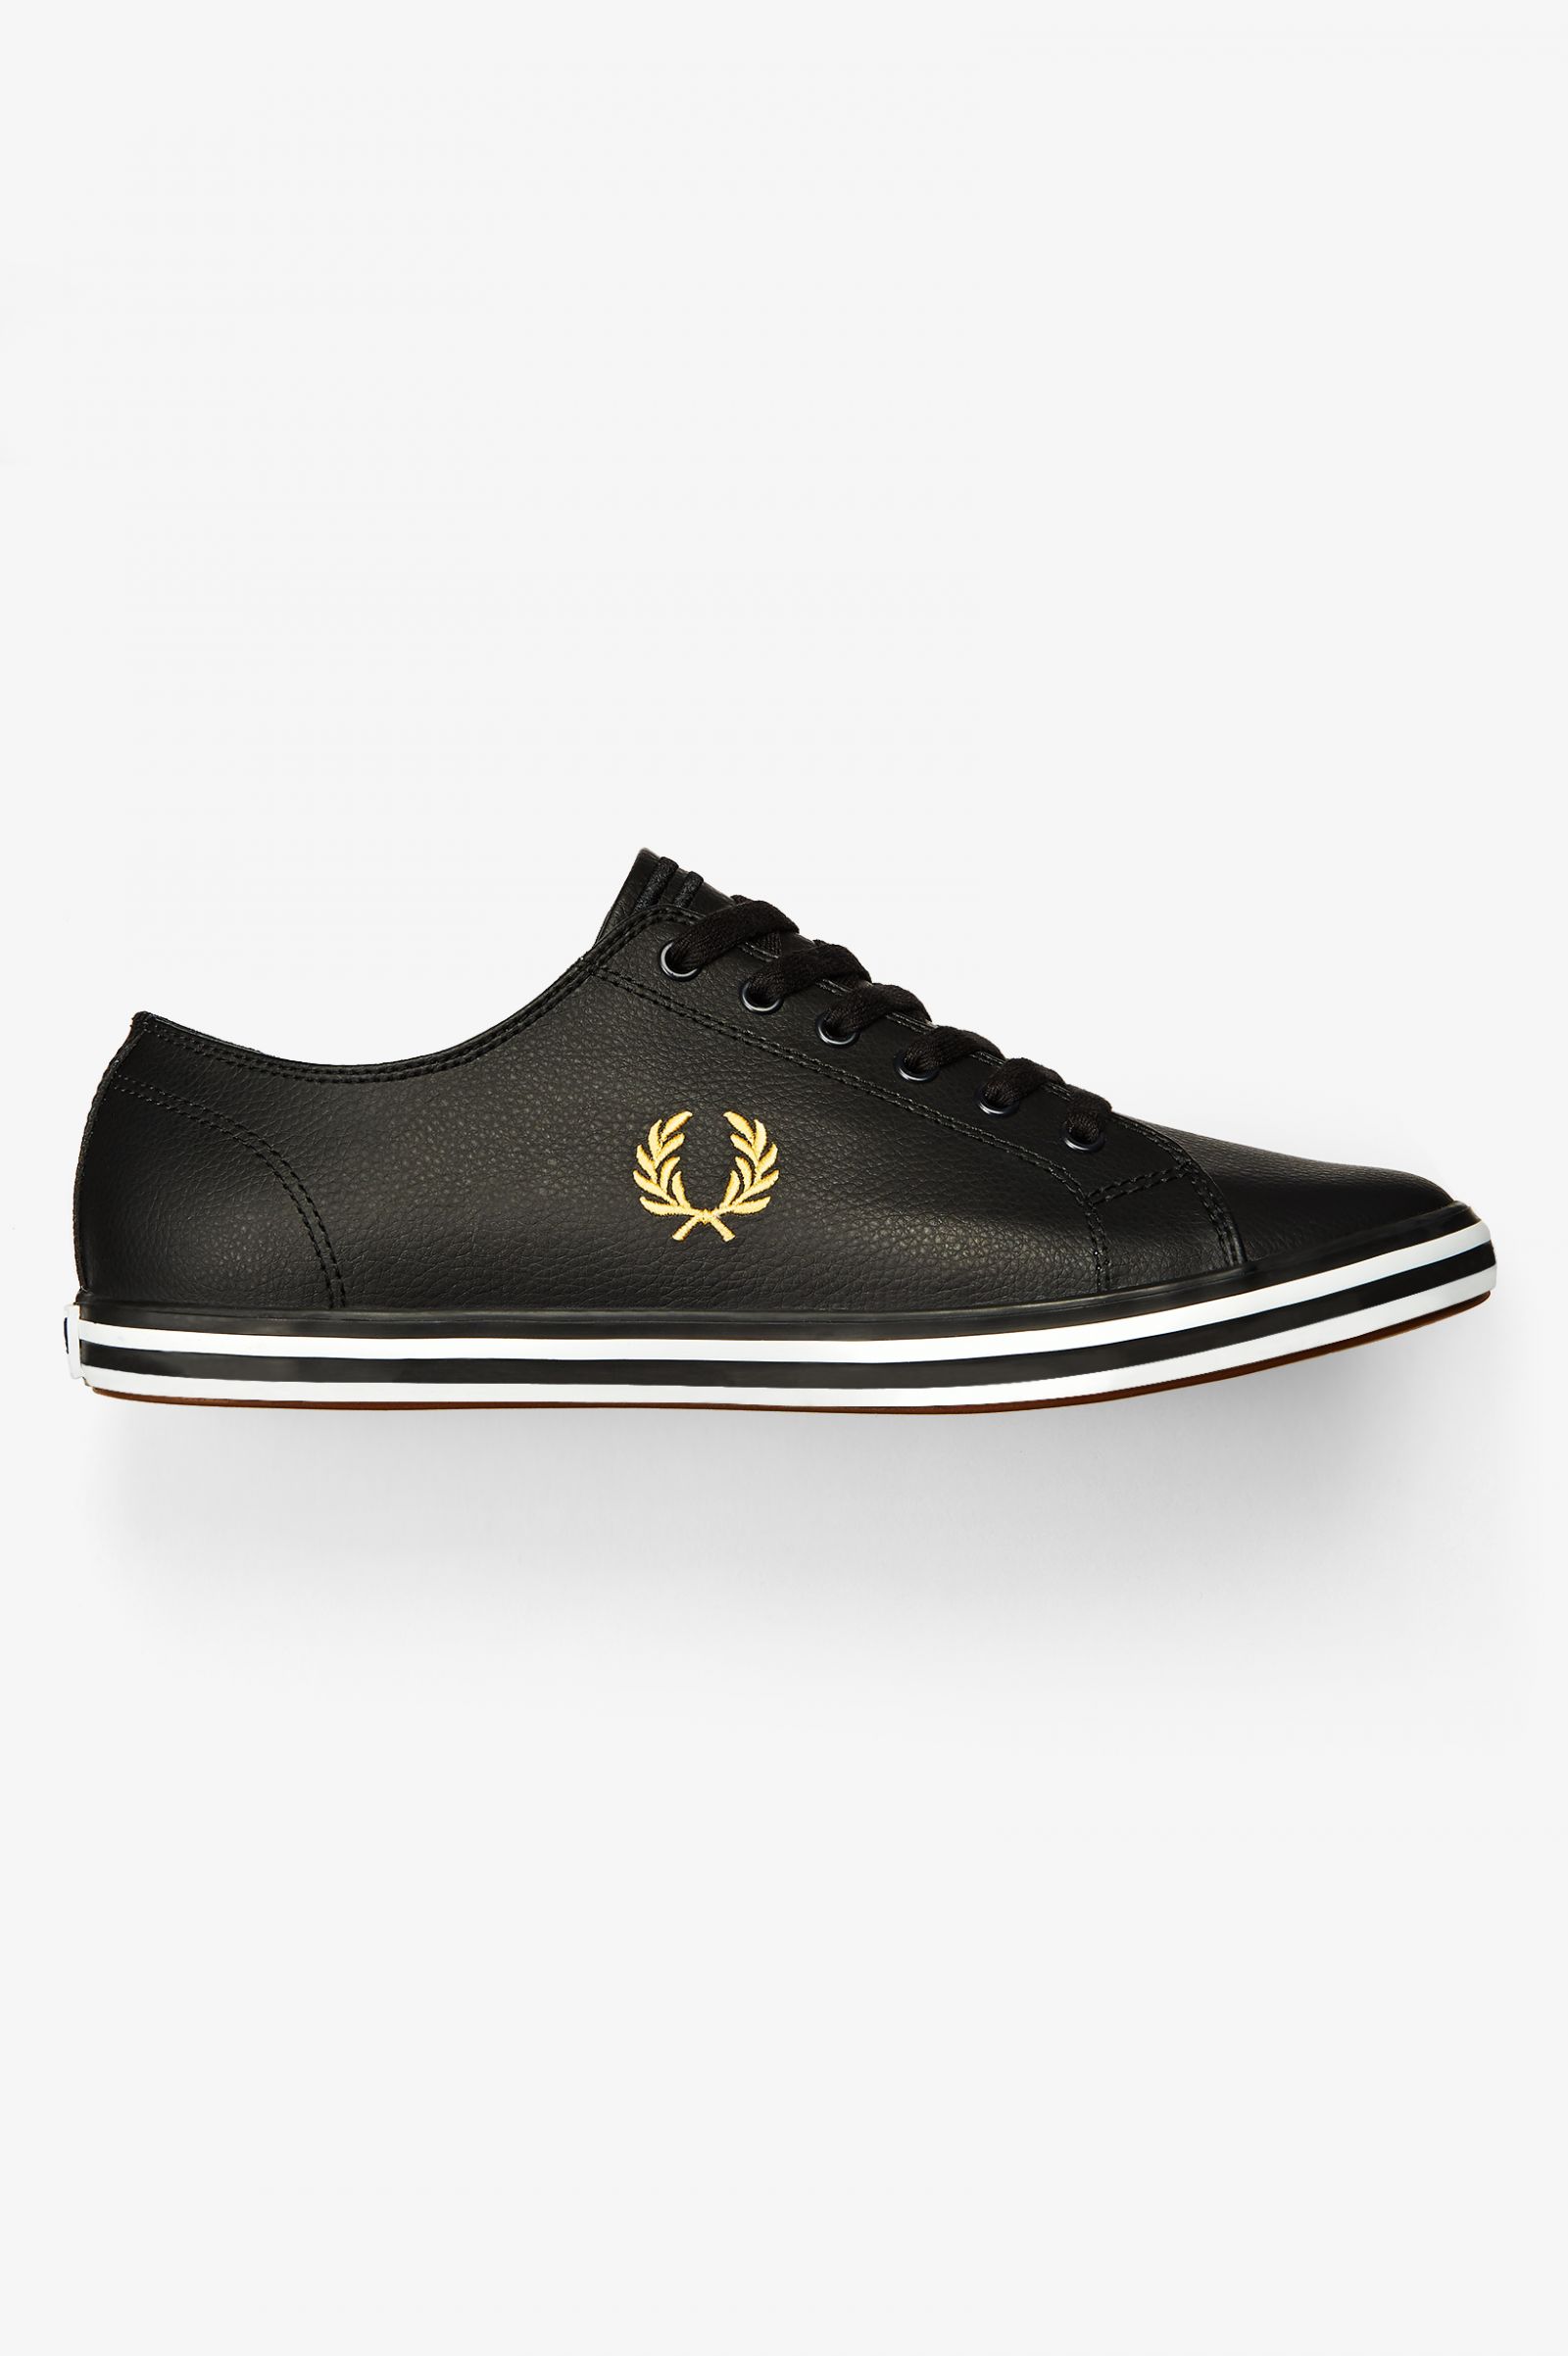 mens fred perry canvas shoes